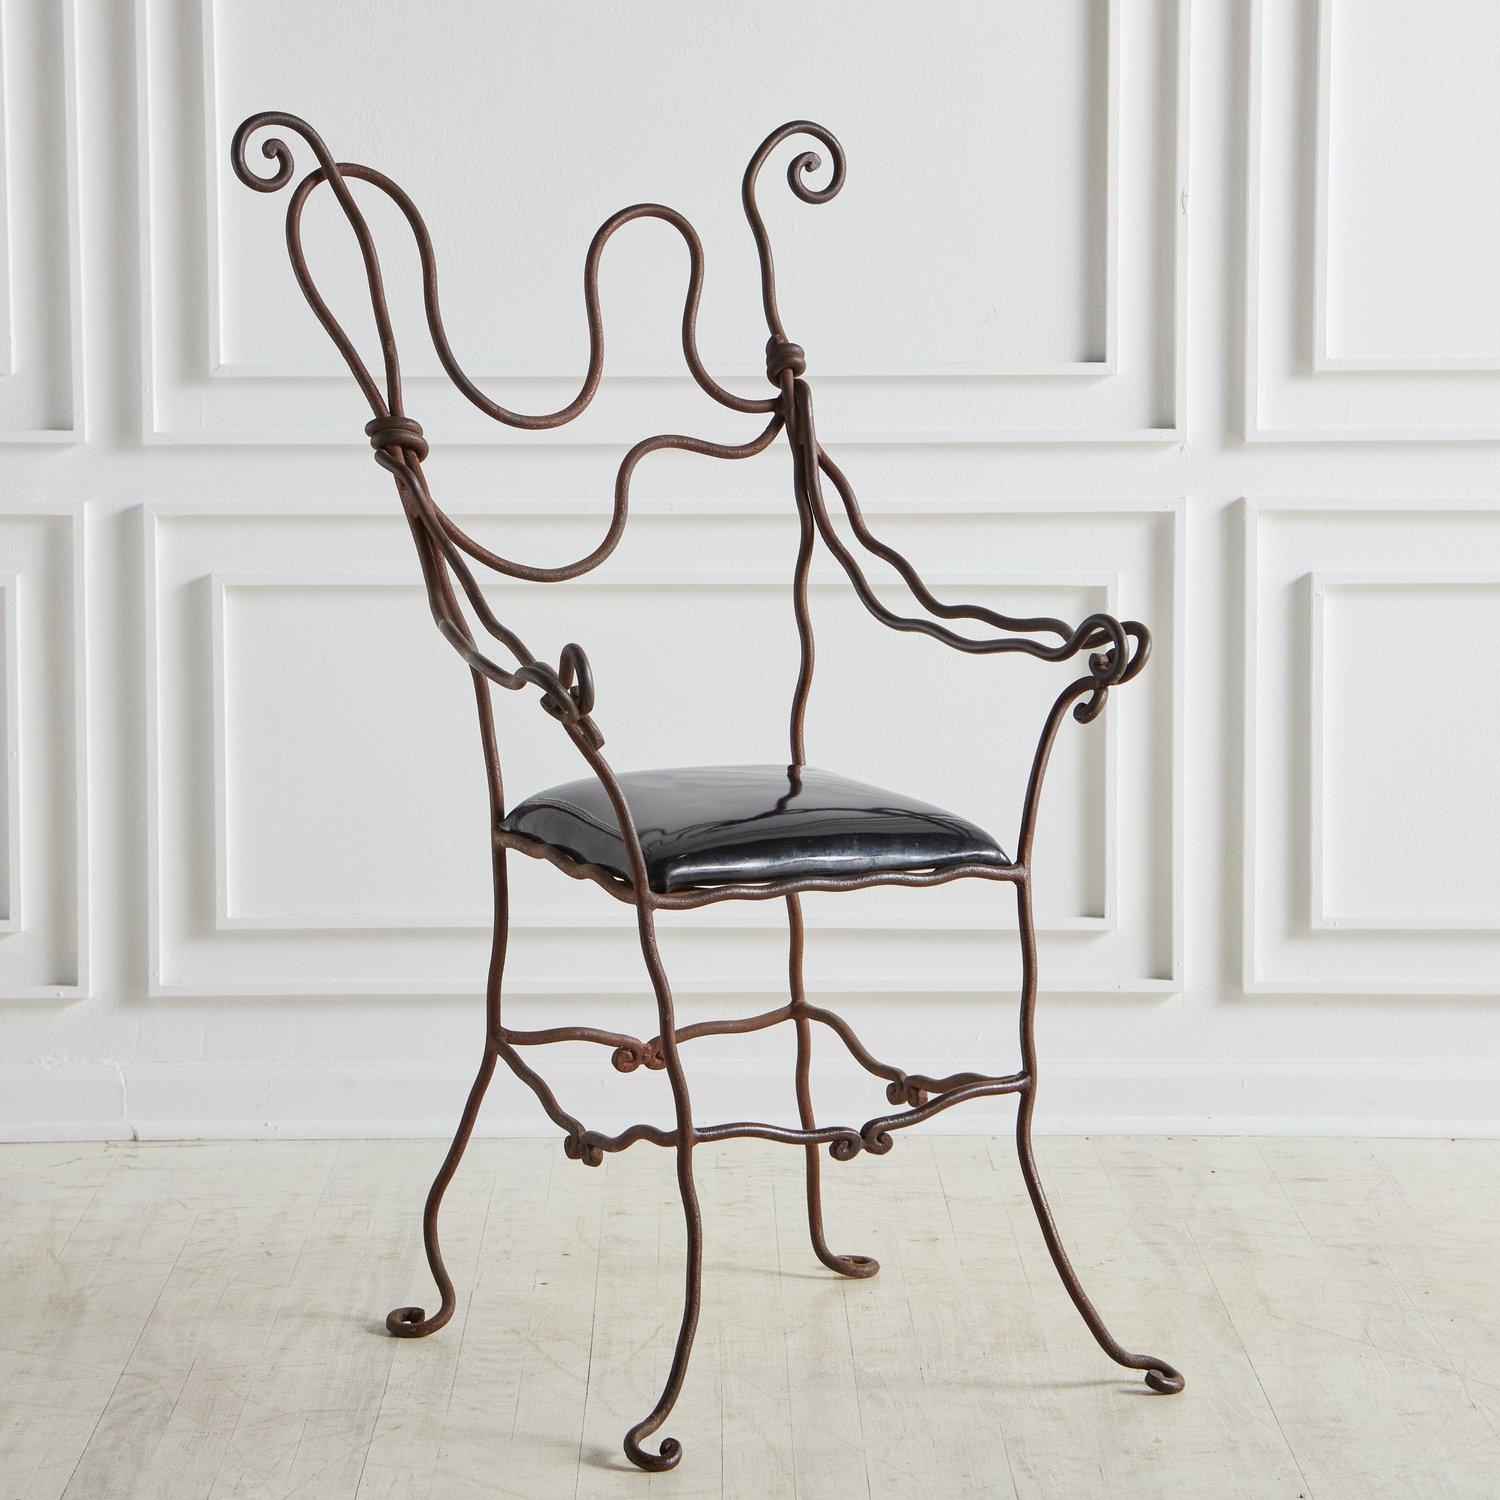 An artisan-made, wrought iron accent chair with a black vinyl upholstered seat. This sculptural chair is one of a kind and features astonishing craftsmanship. Sourced in France, 1950s.